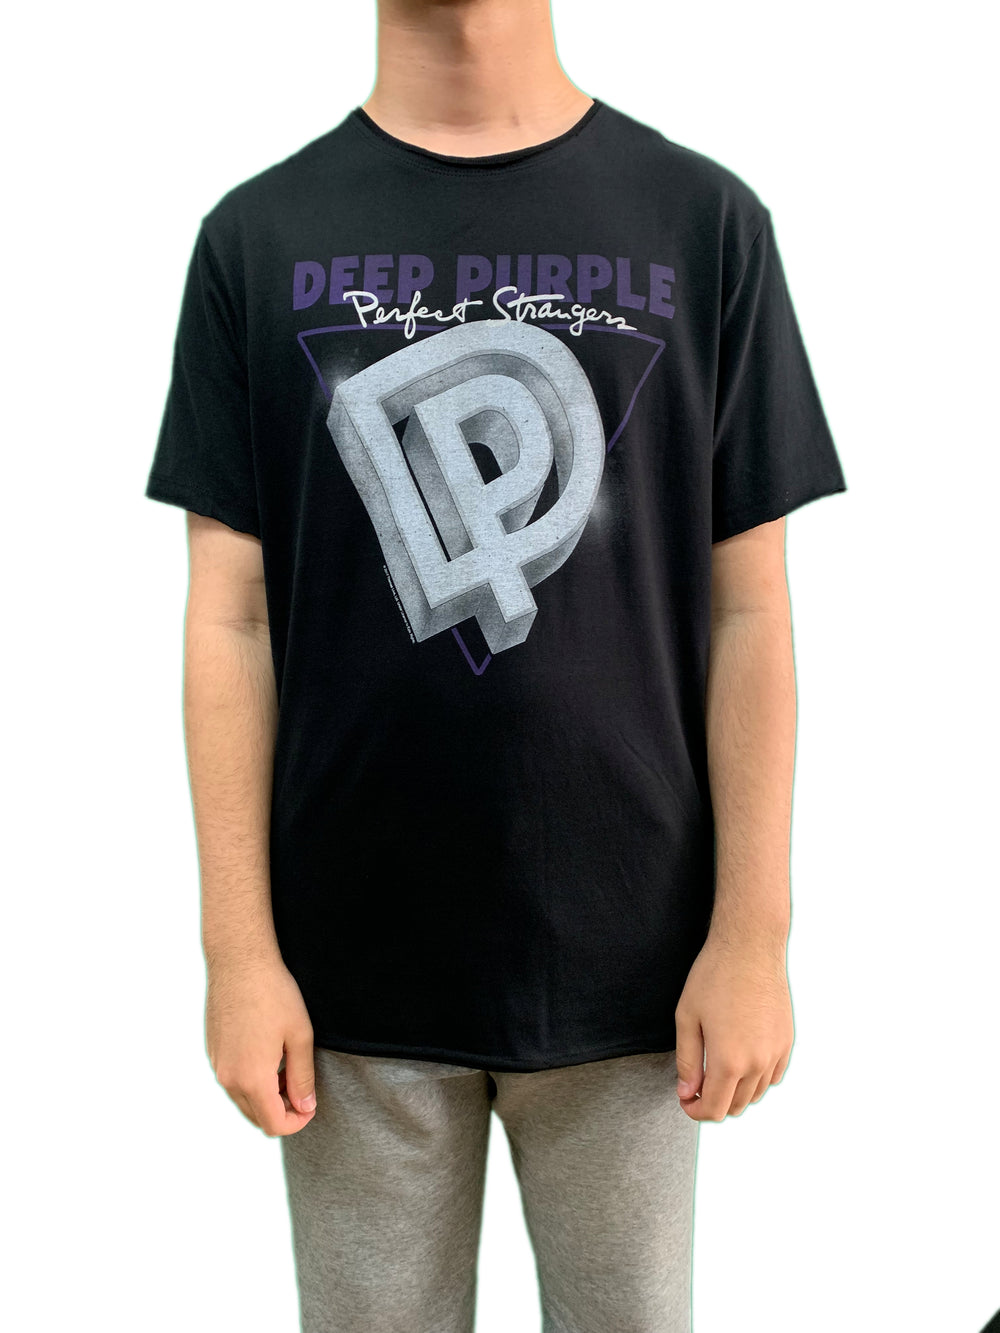 Deep Purple Perfect Strangers Amplified Unisex Official Tee Shirt Brand New Various Sizes